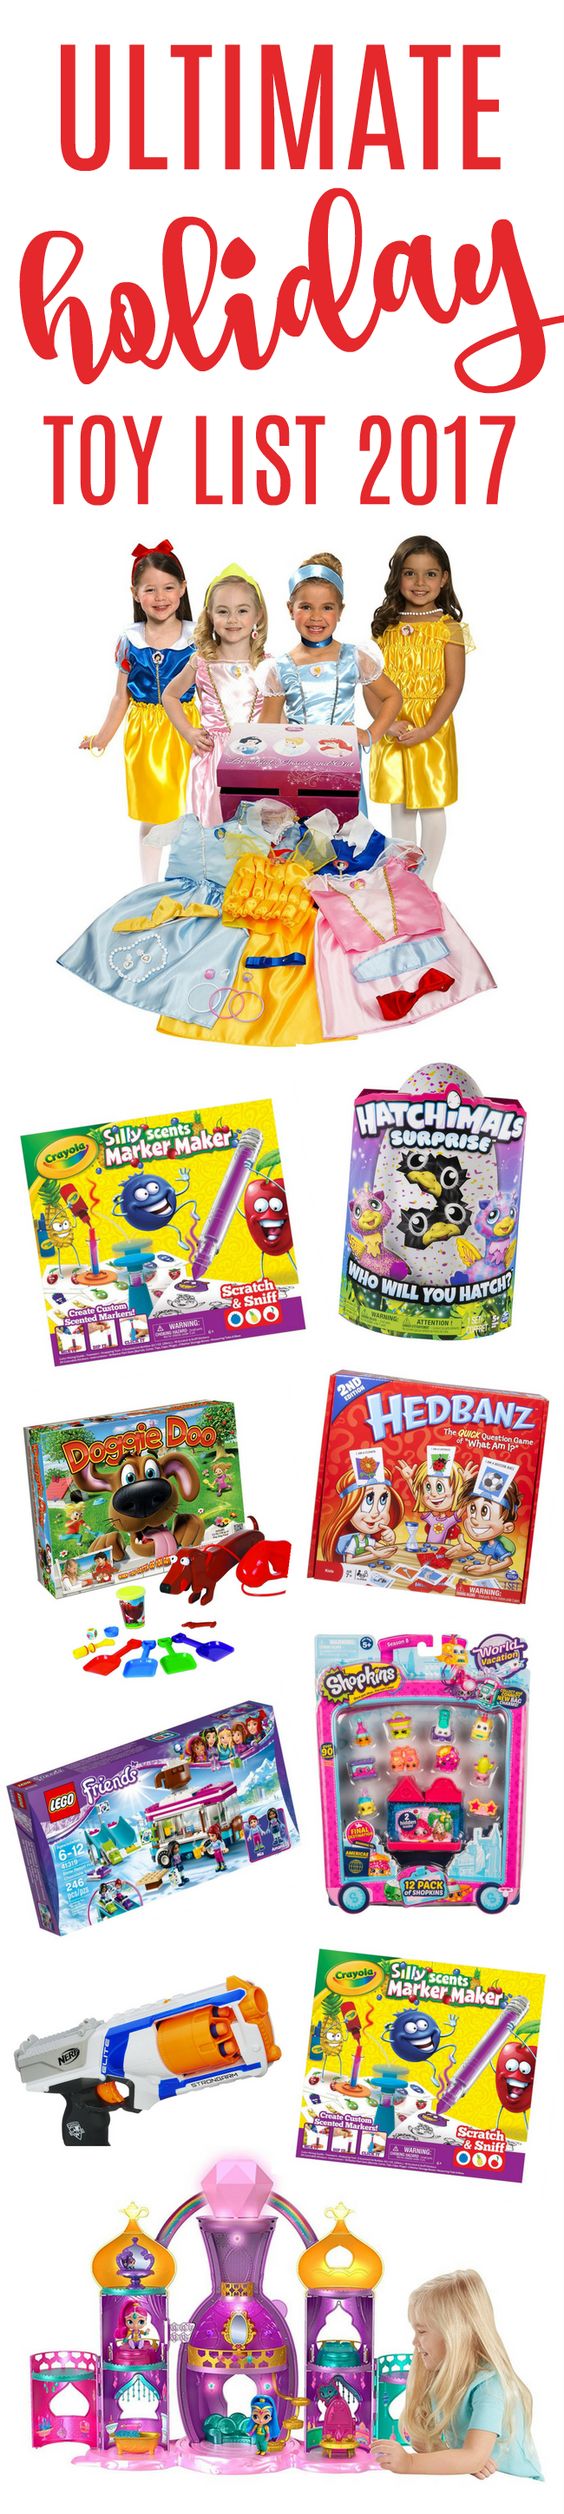 Ultimate Holiday Gift Guide For Kids - Top Holiday Toys